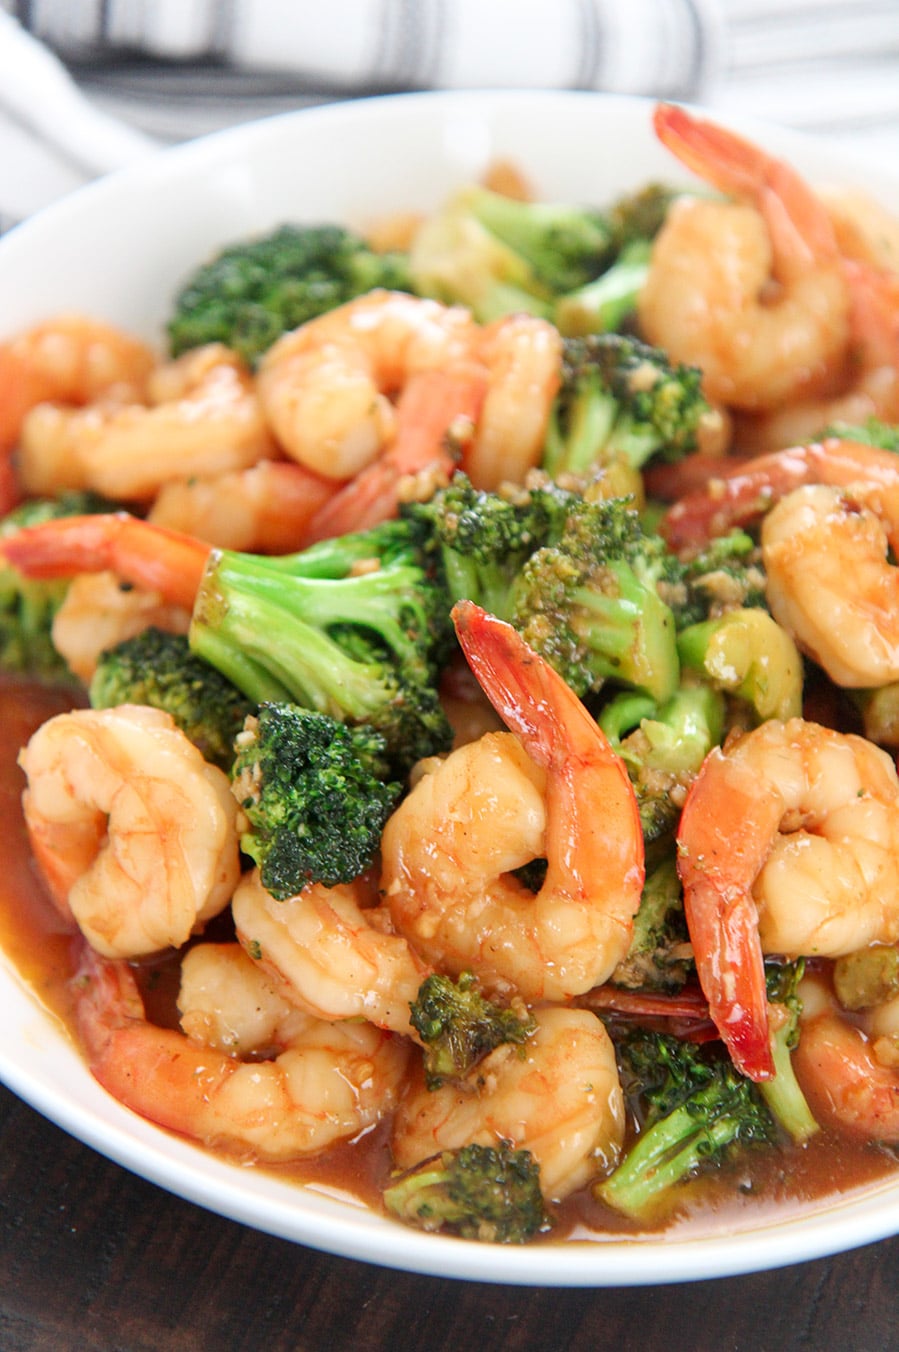 shrimp and broccoli with sauce in a white plate.